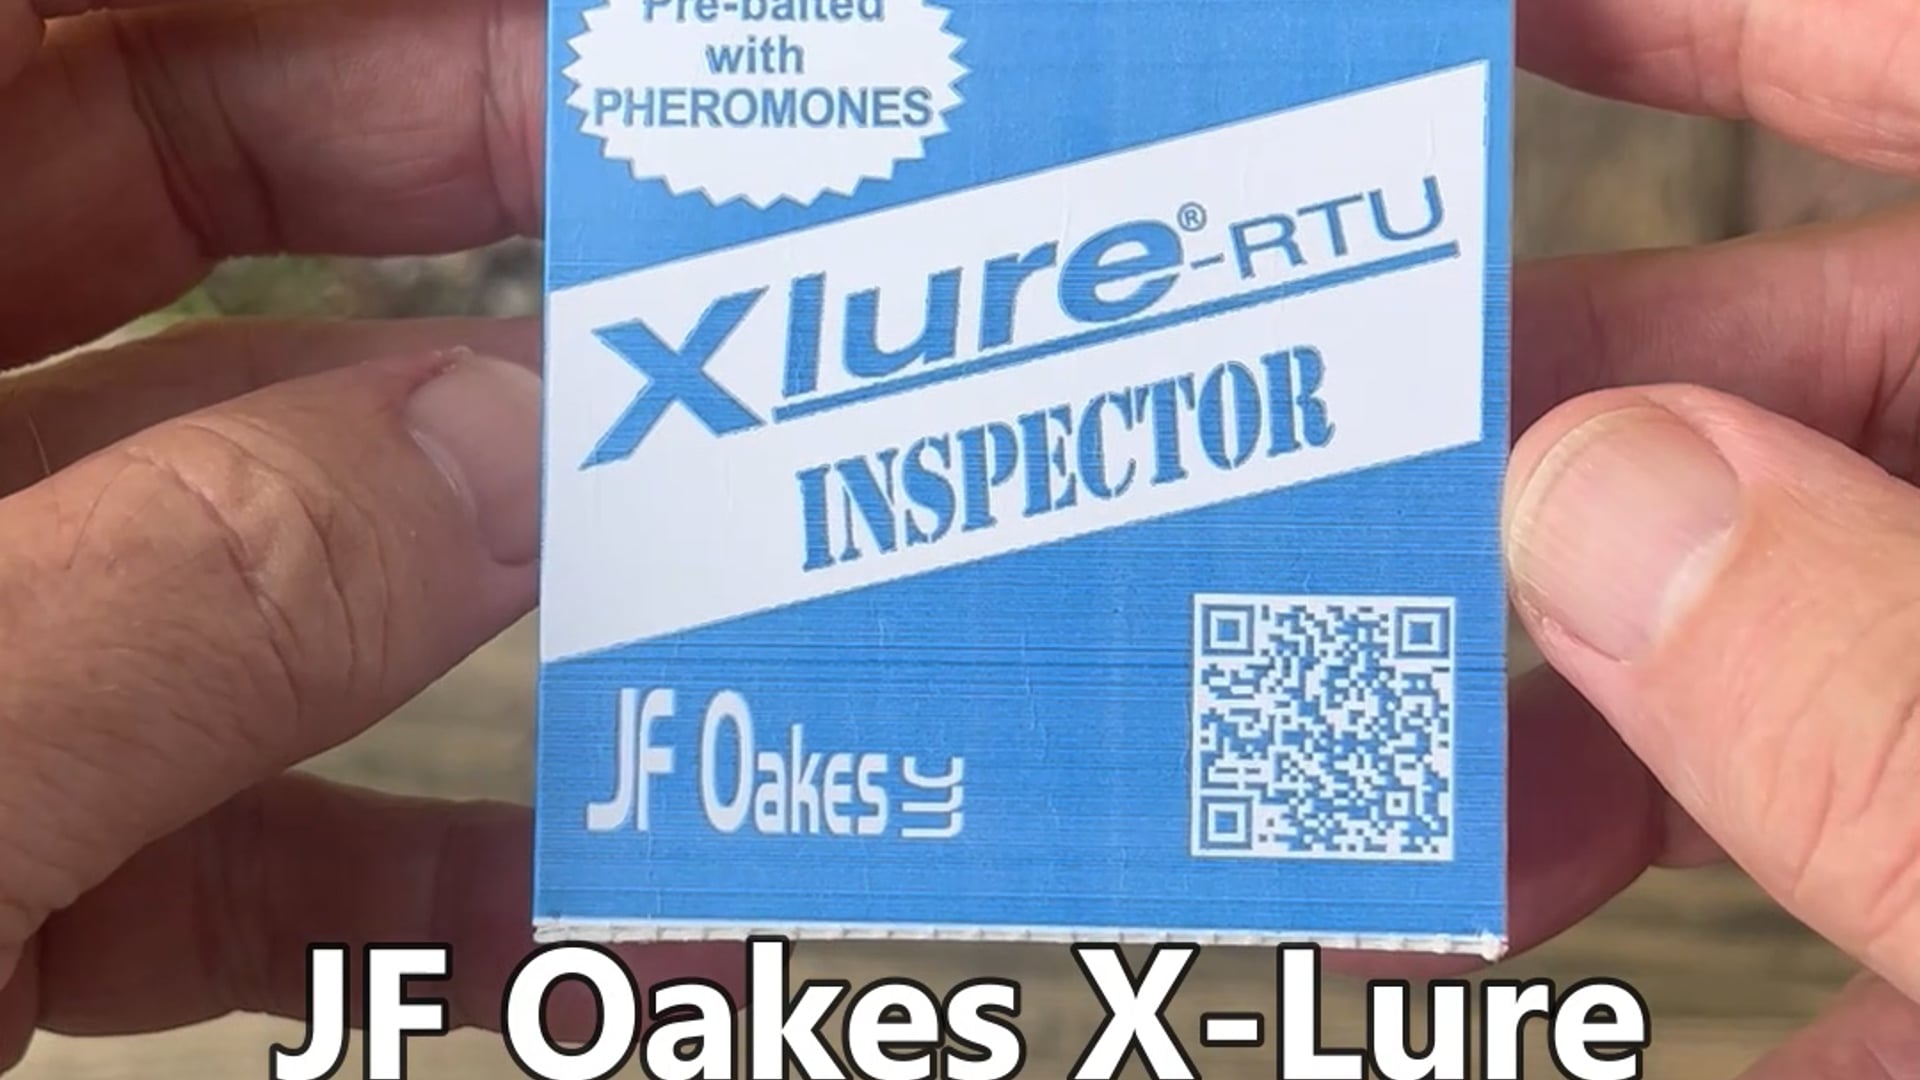 Xlure Inspector, your best trap to find stored product insect infestations.